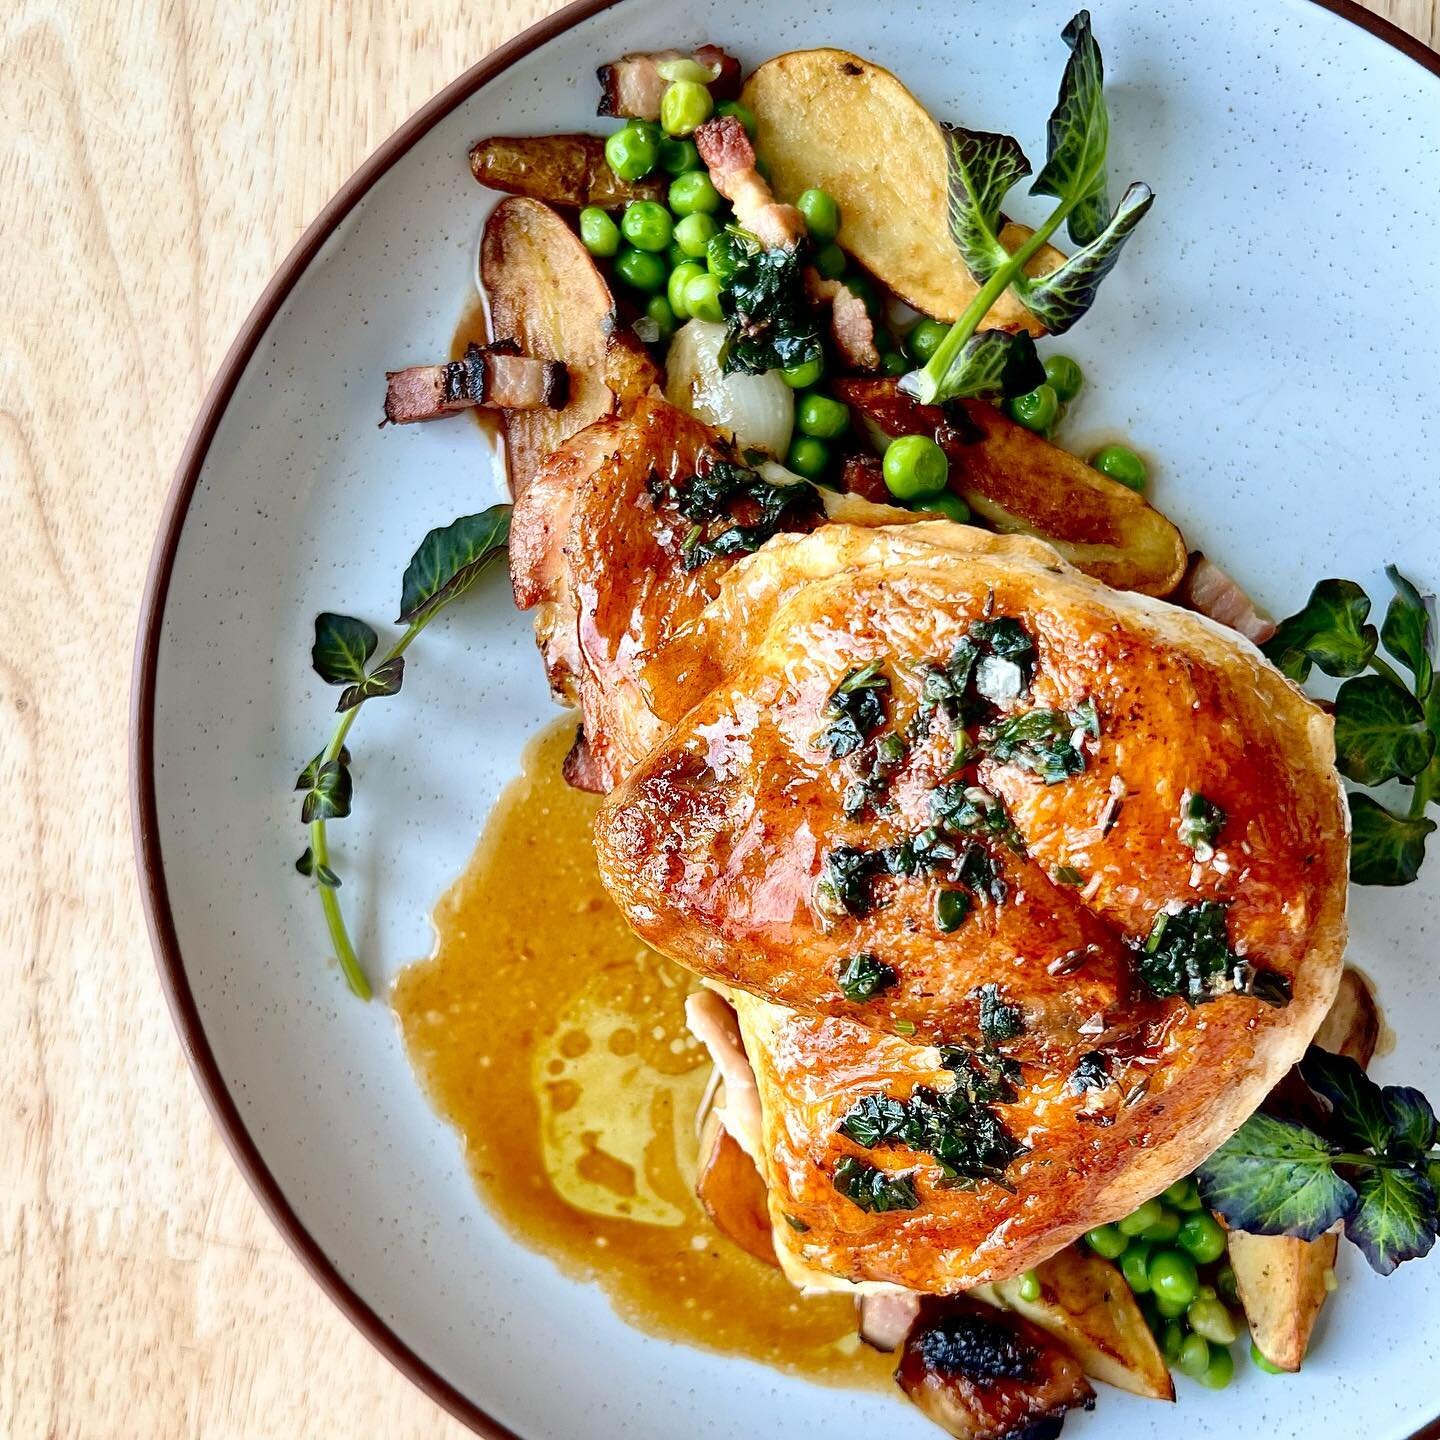 If you haven&rsquo;t tried chef&rsquo;s new chicken, today your lucky day!! We are now open on Sunday nights.

Bell &amp; Evans heritage chicken, fingerlings, english peas, onion, FSE bacon, anchovy salsa verde, white wine shallot jus (and it&rsquo;s